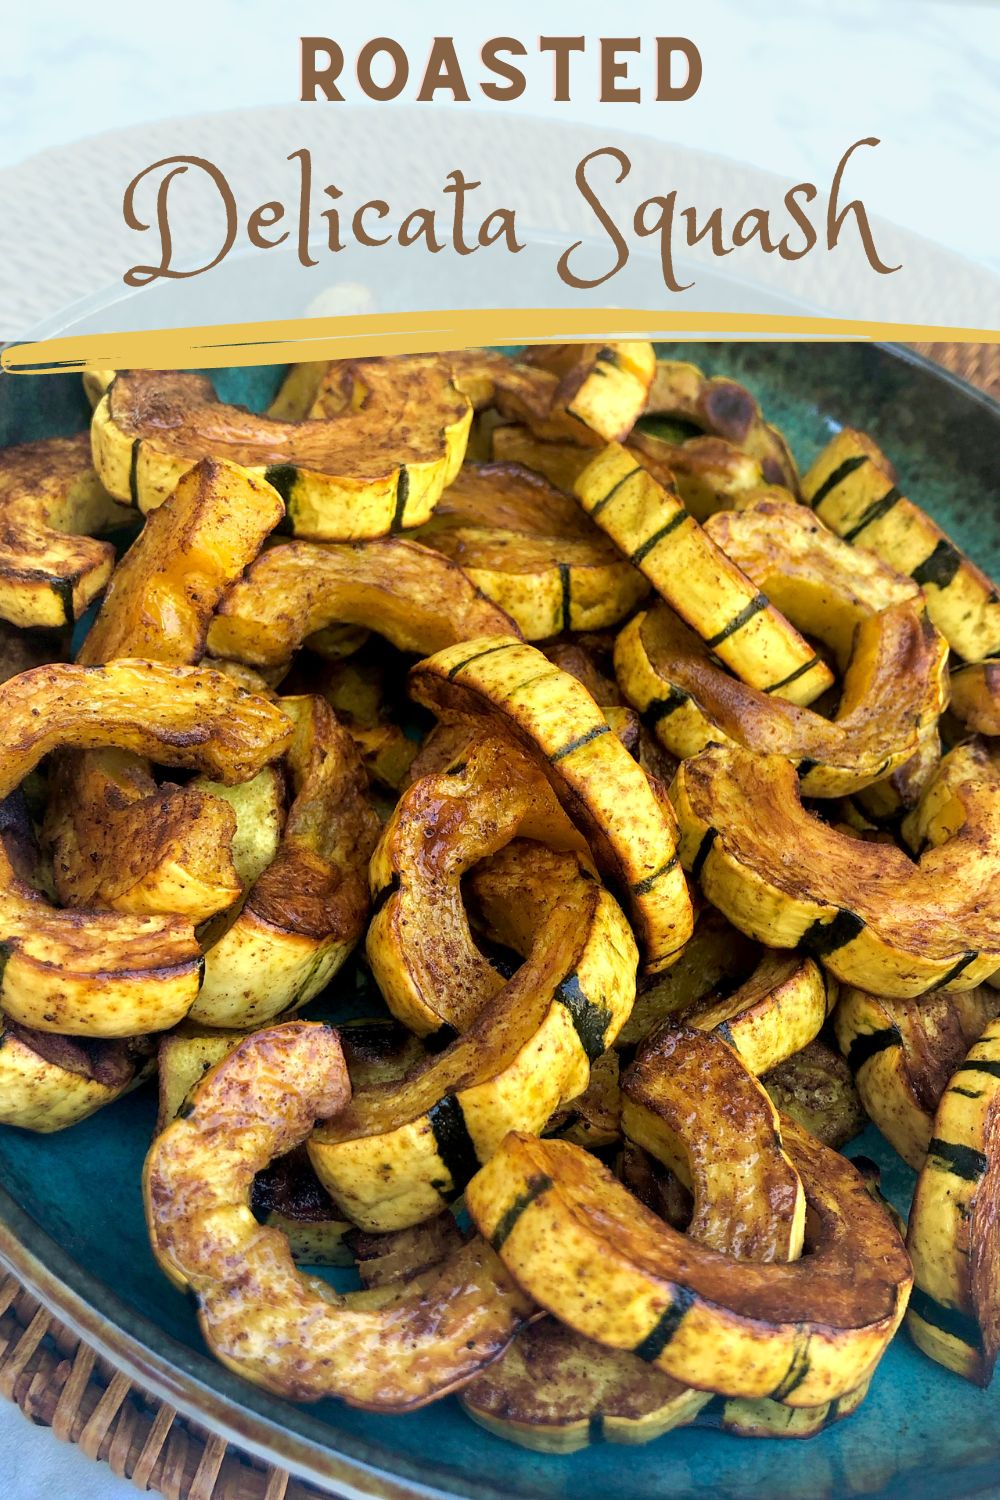 Roasted delicata squash half moons on a teal dish.